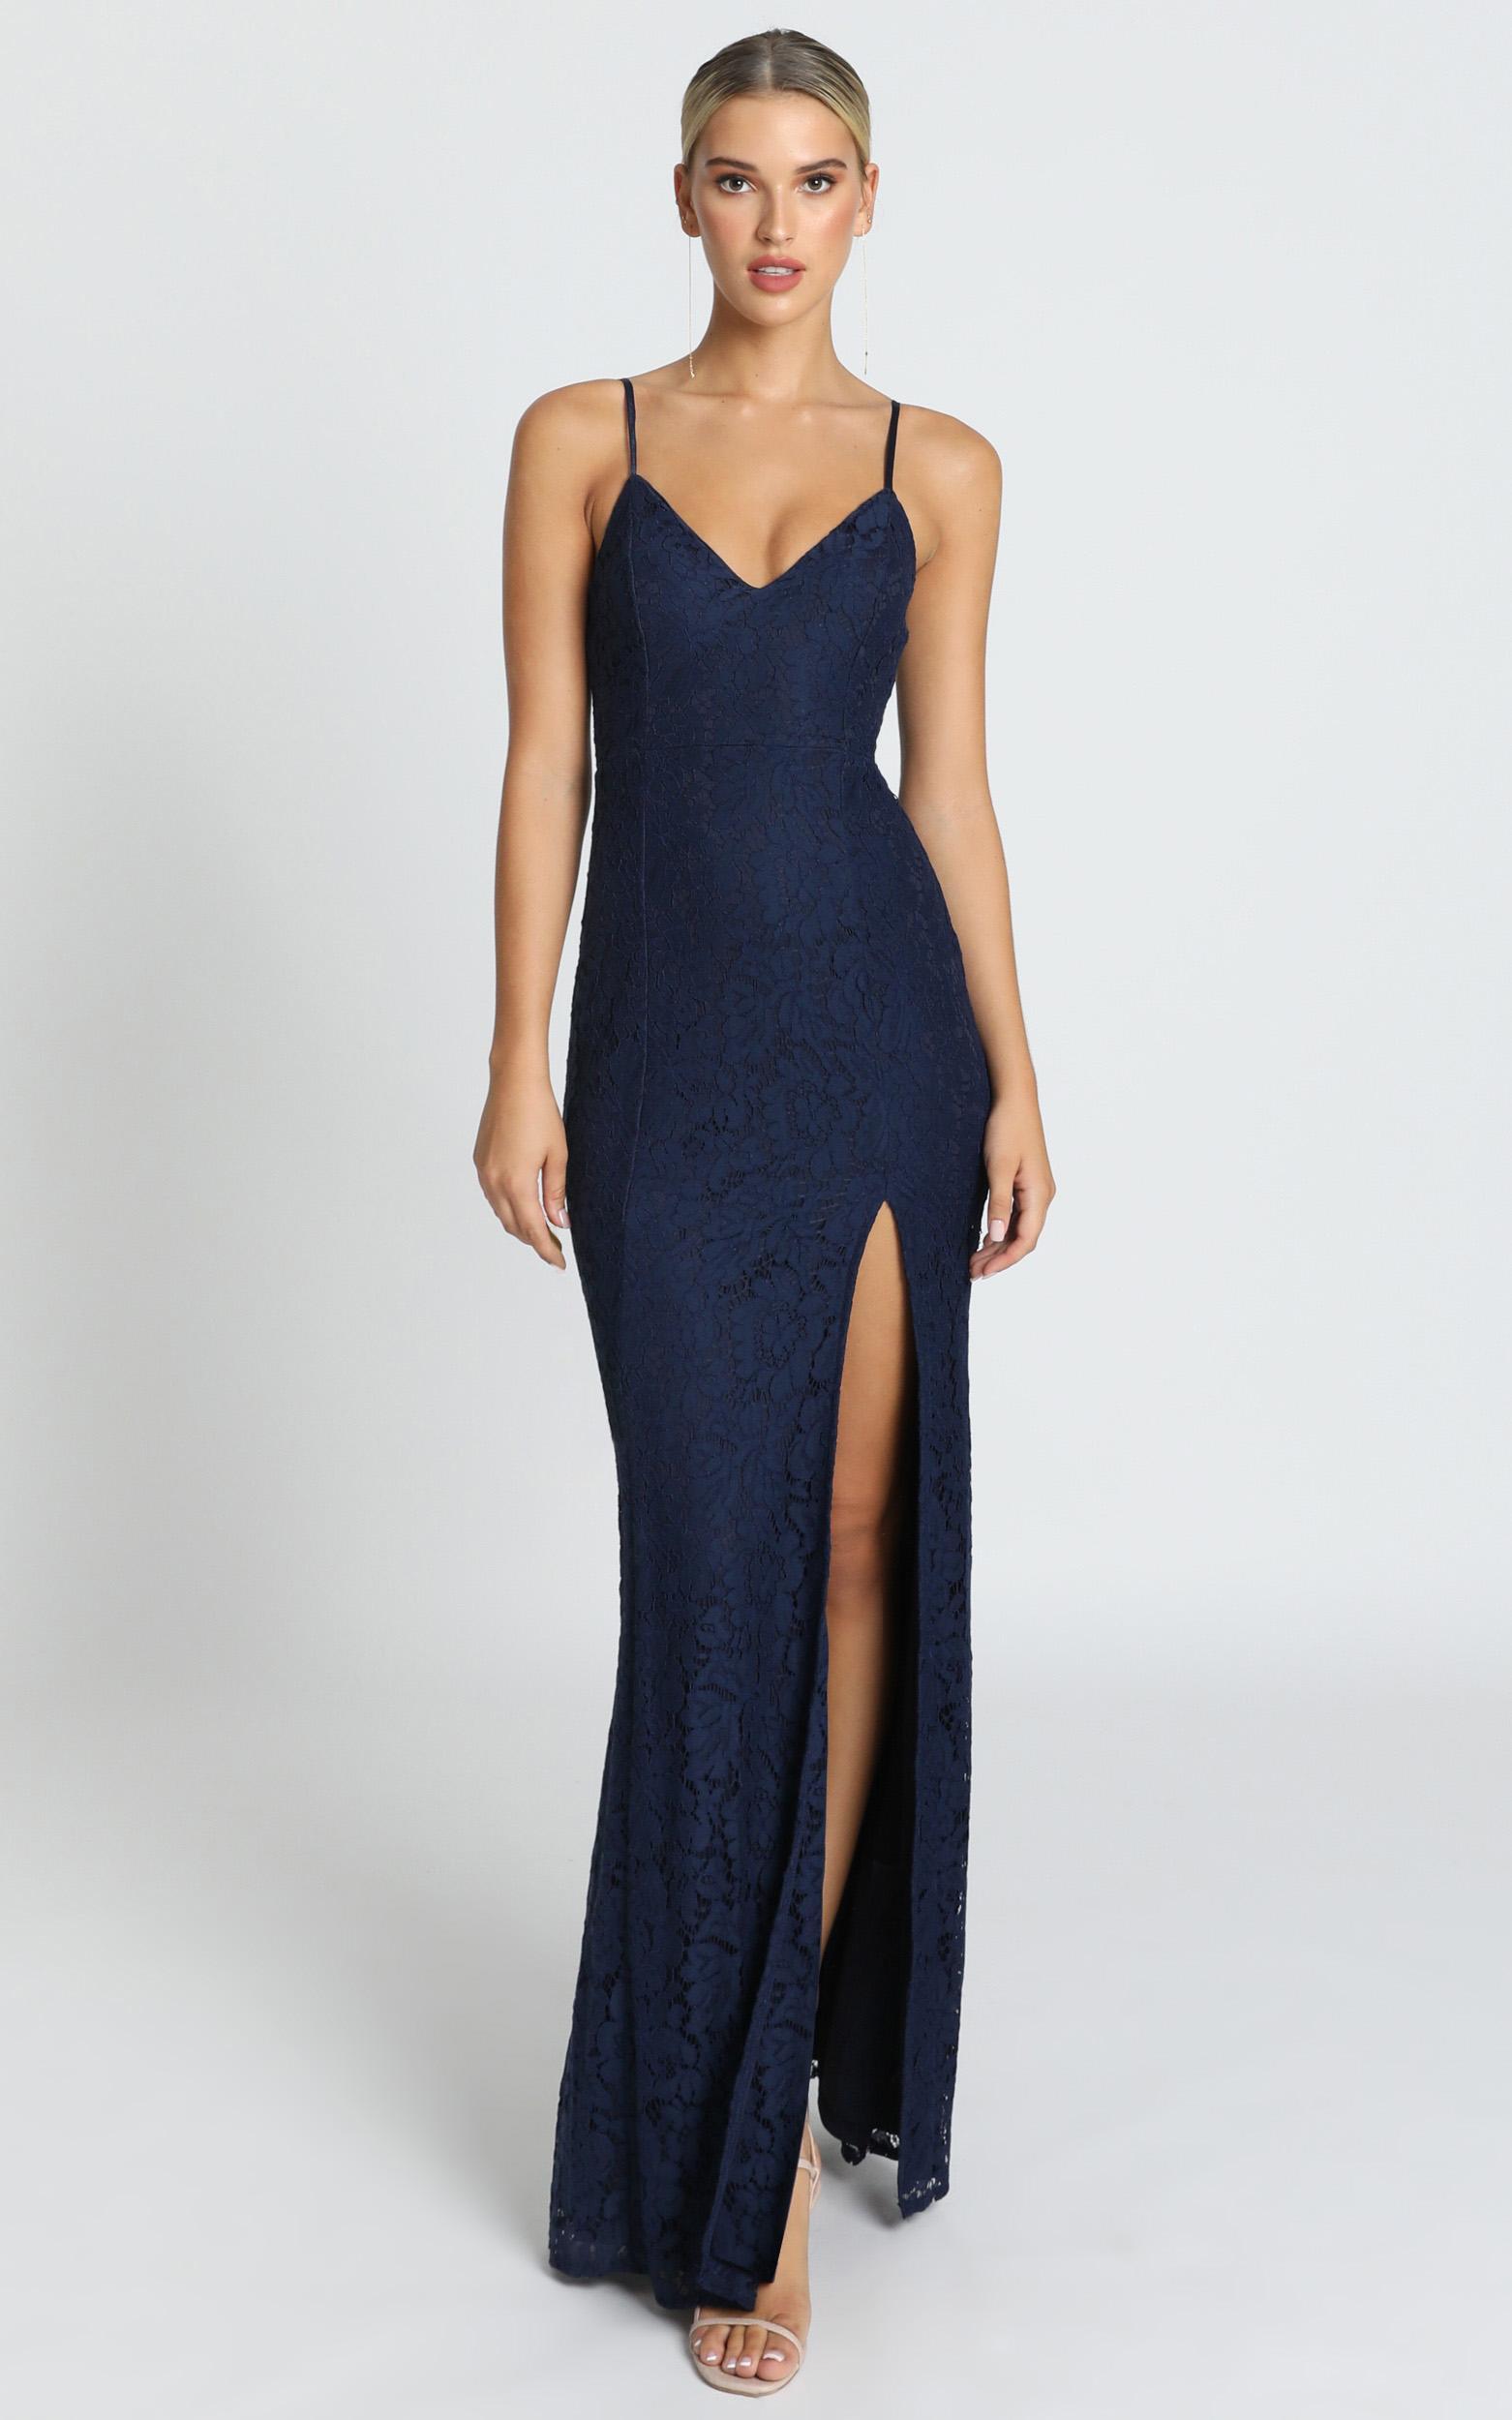 Always Extra Split Maxi Dress in Navy - 20, NVY3, hi-res image number null